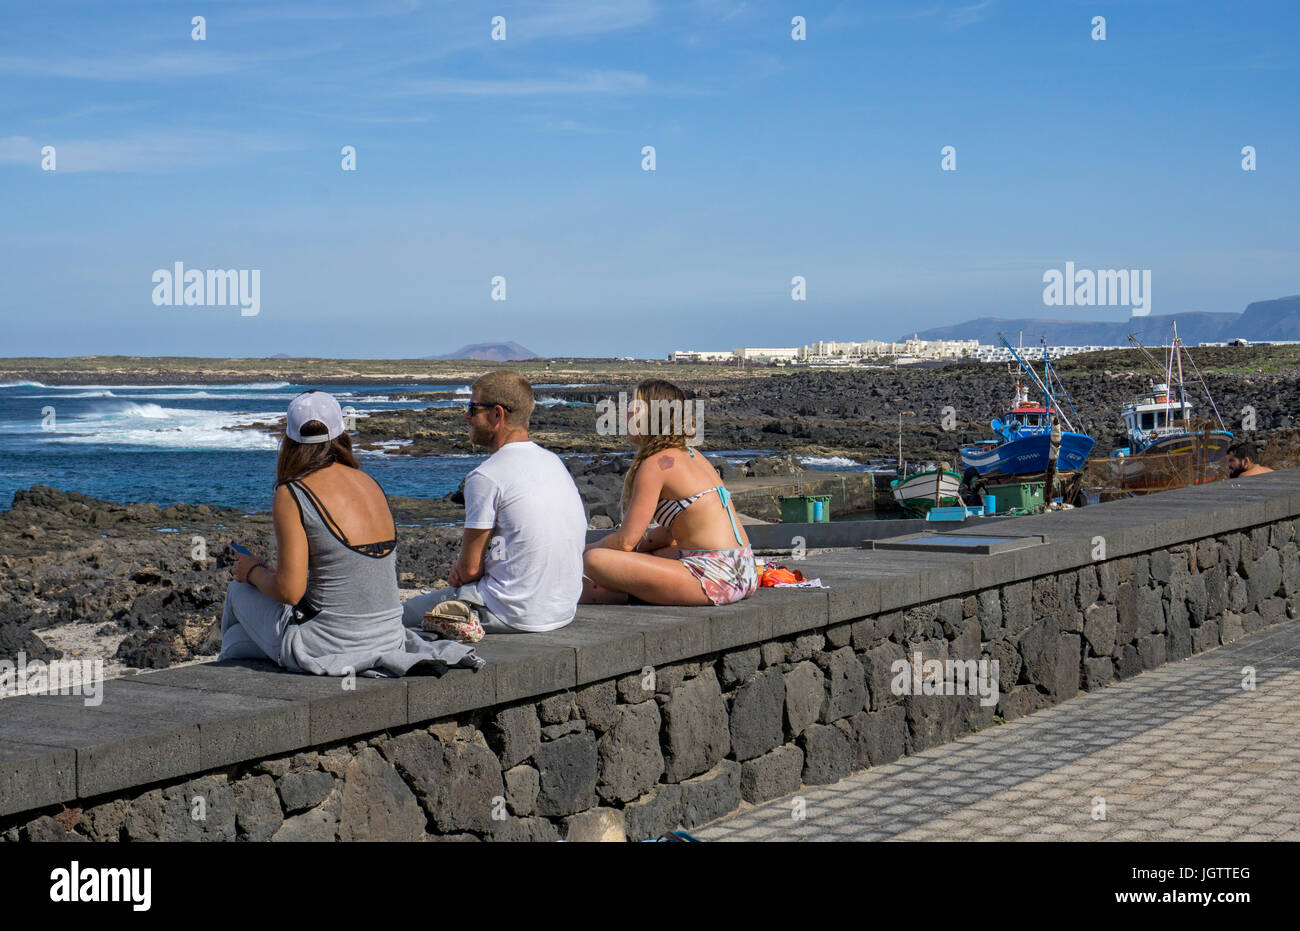 Young people sitting on harbour mural, village La Santa at north coast of Lanzarote island, Canary islands, Spain, Europe Stock Photo